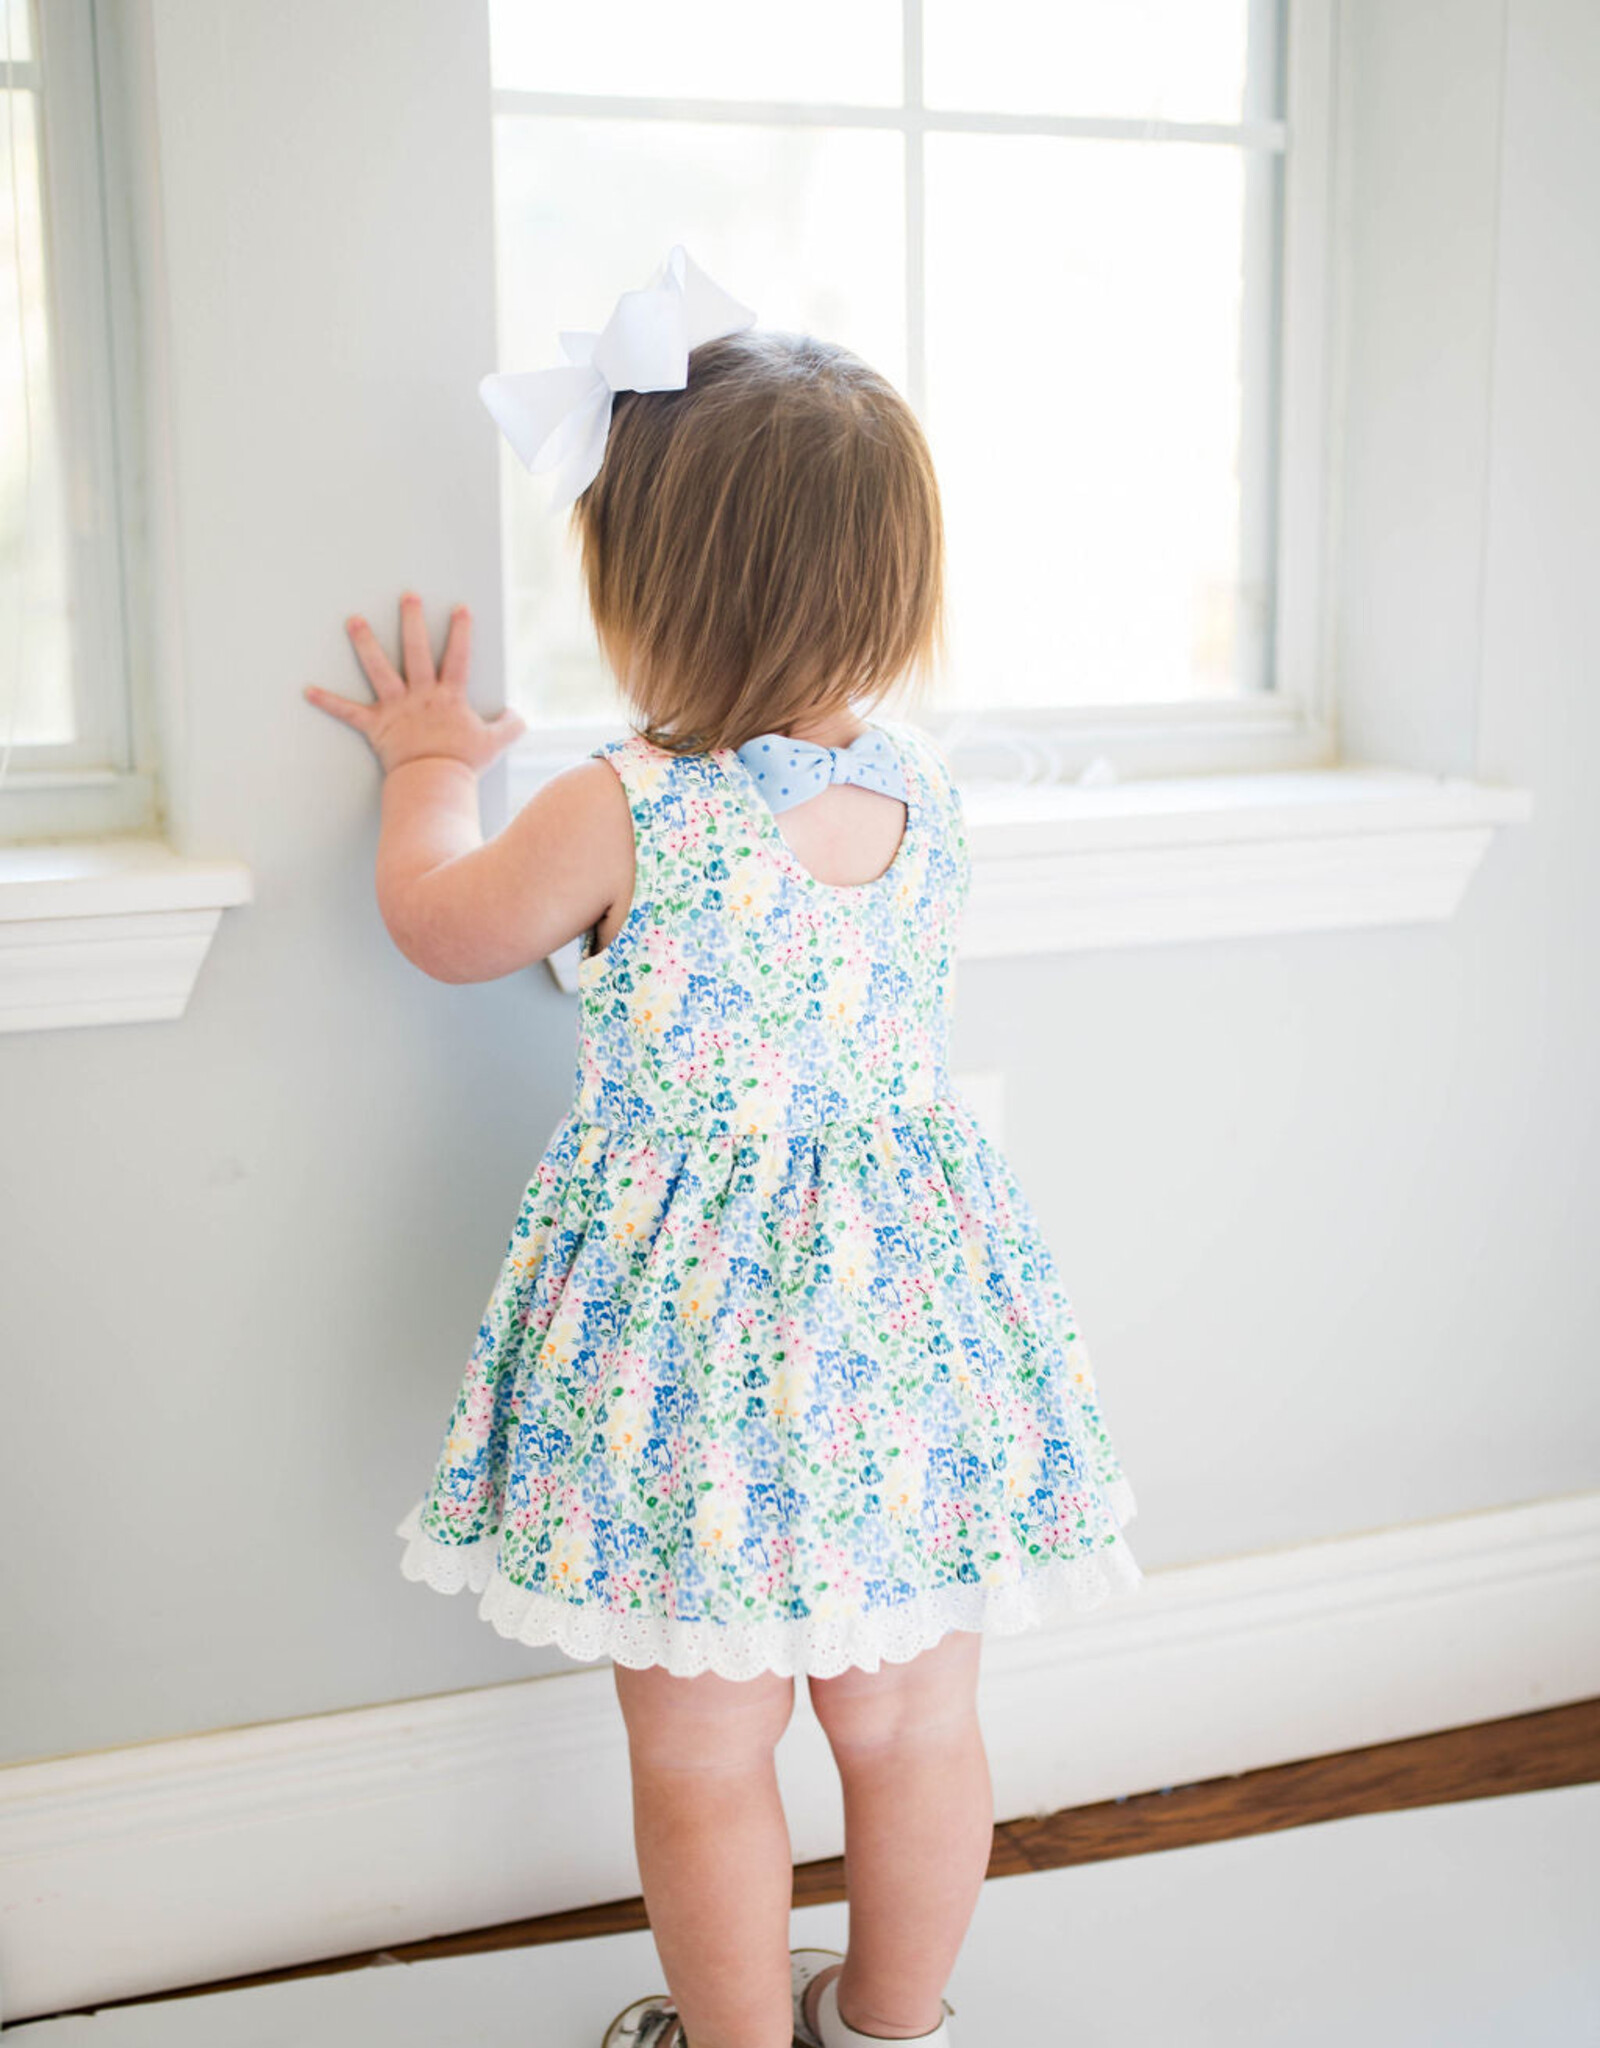 Swoon Baby 2413 Blue Floral Bubble Dress